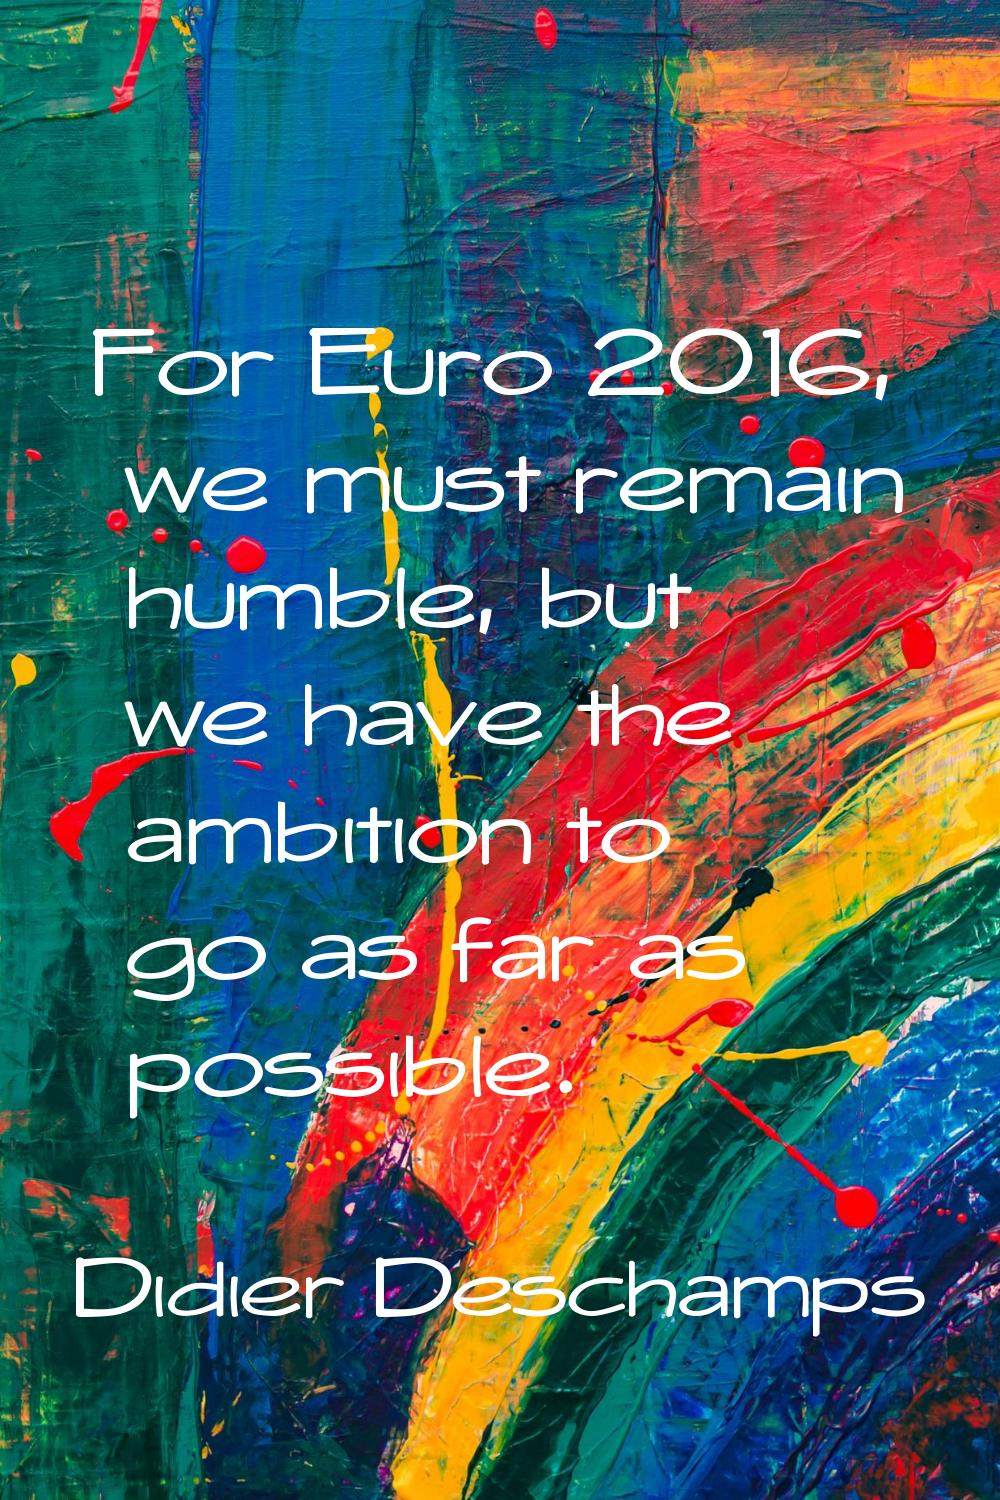 For Euro 2016, we must remain humble, but we have the ambition to go as far as possible.